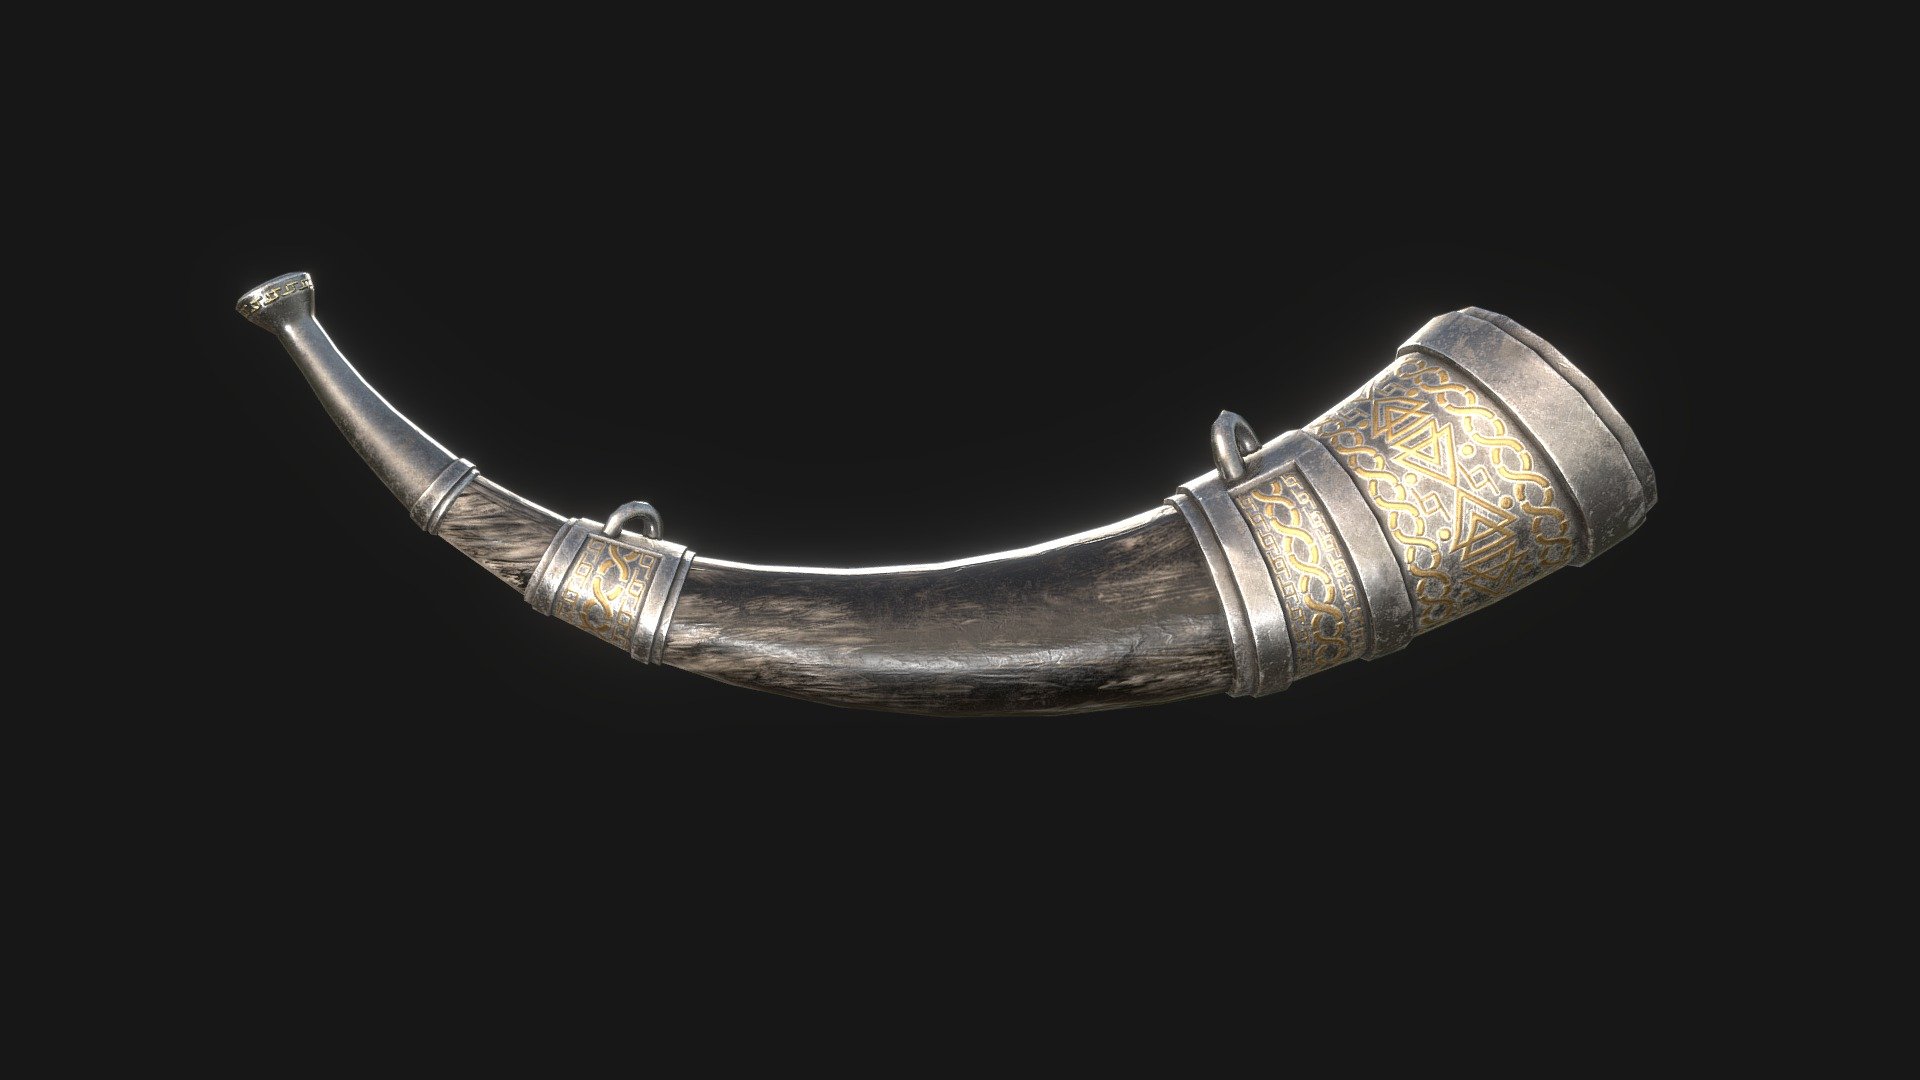 Game ready viking war horn, used for signaling in battles. The model is about 35cm in length. Its ready to be used in lates game engines (Unreal Engine, Unity) Comes in different varieties, make sure you check them all out!


Format: FBX, OBJ, DAE

PBR textures: Metallic/Roughness, Specular/Glossiness

Normal map: DirectX, OpenGL

Unreal Engine and Unity optimized textures

Texture resolution: 1024, 2048, 4096

Blender Project file included

Scaled to real world proportions


Check out my portfolio for more examples of my work

https://chuwakcz.artstation.com/

Also follow me on other platforms for updates on my products and the releases of new ones

https://www.instagram.com/chuwakcz/

https://www.linkedin.com/in/dominikmaral/ - Viking War Horn - Decorated/Black - Buy Royalty Free 3D model by Chuwakcz 3d model